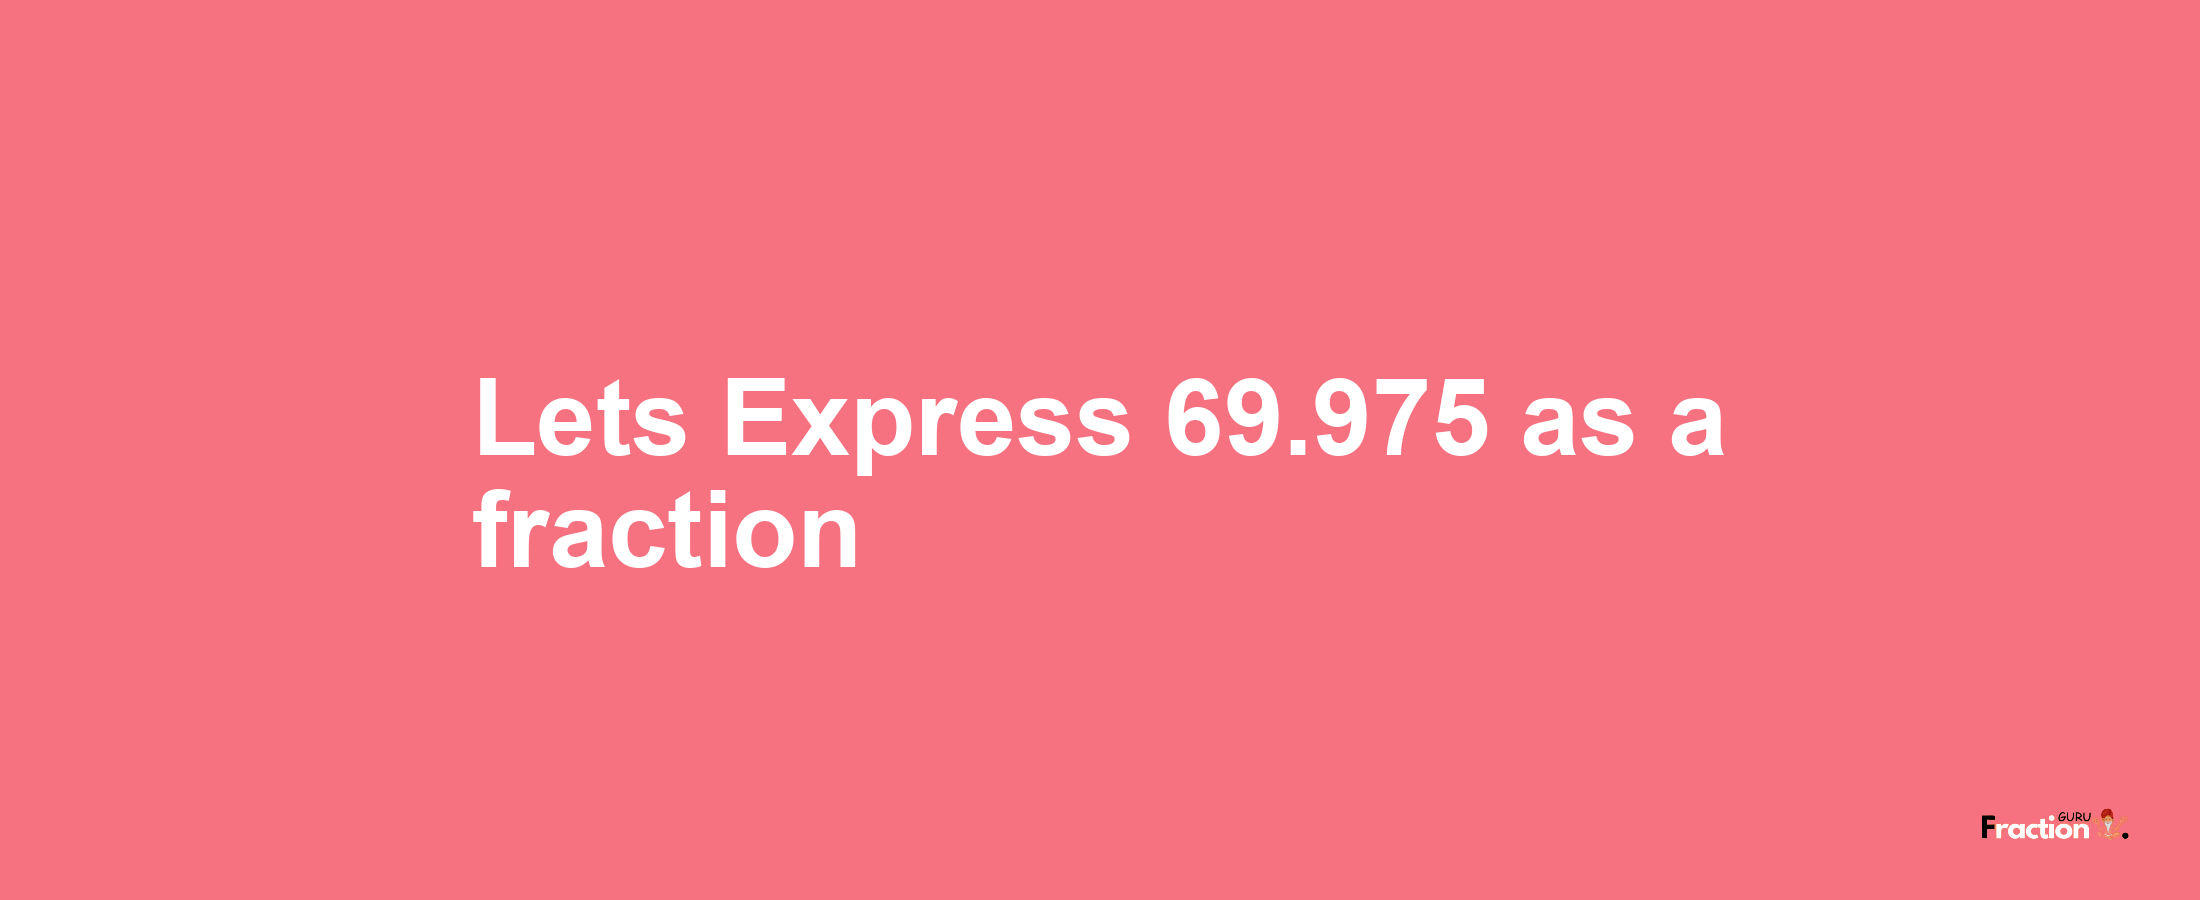 Lets Express 69.975 as afraction